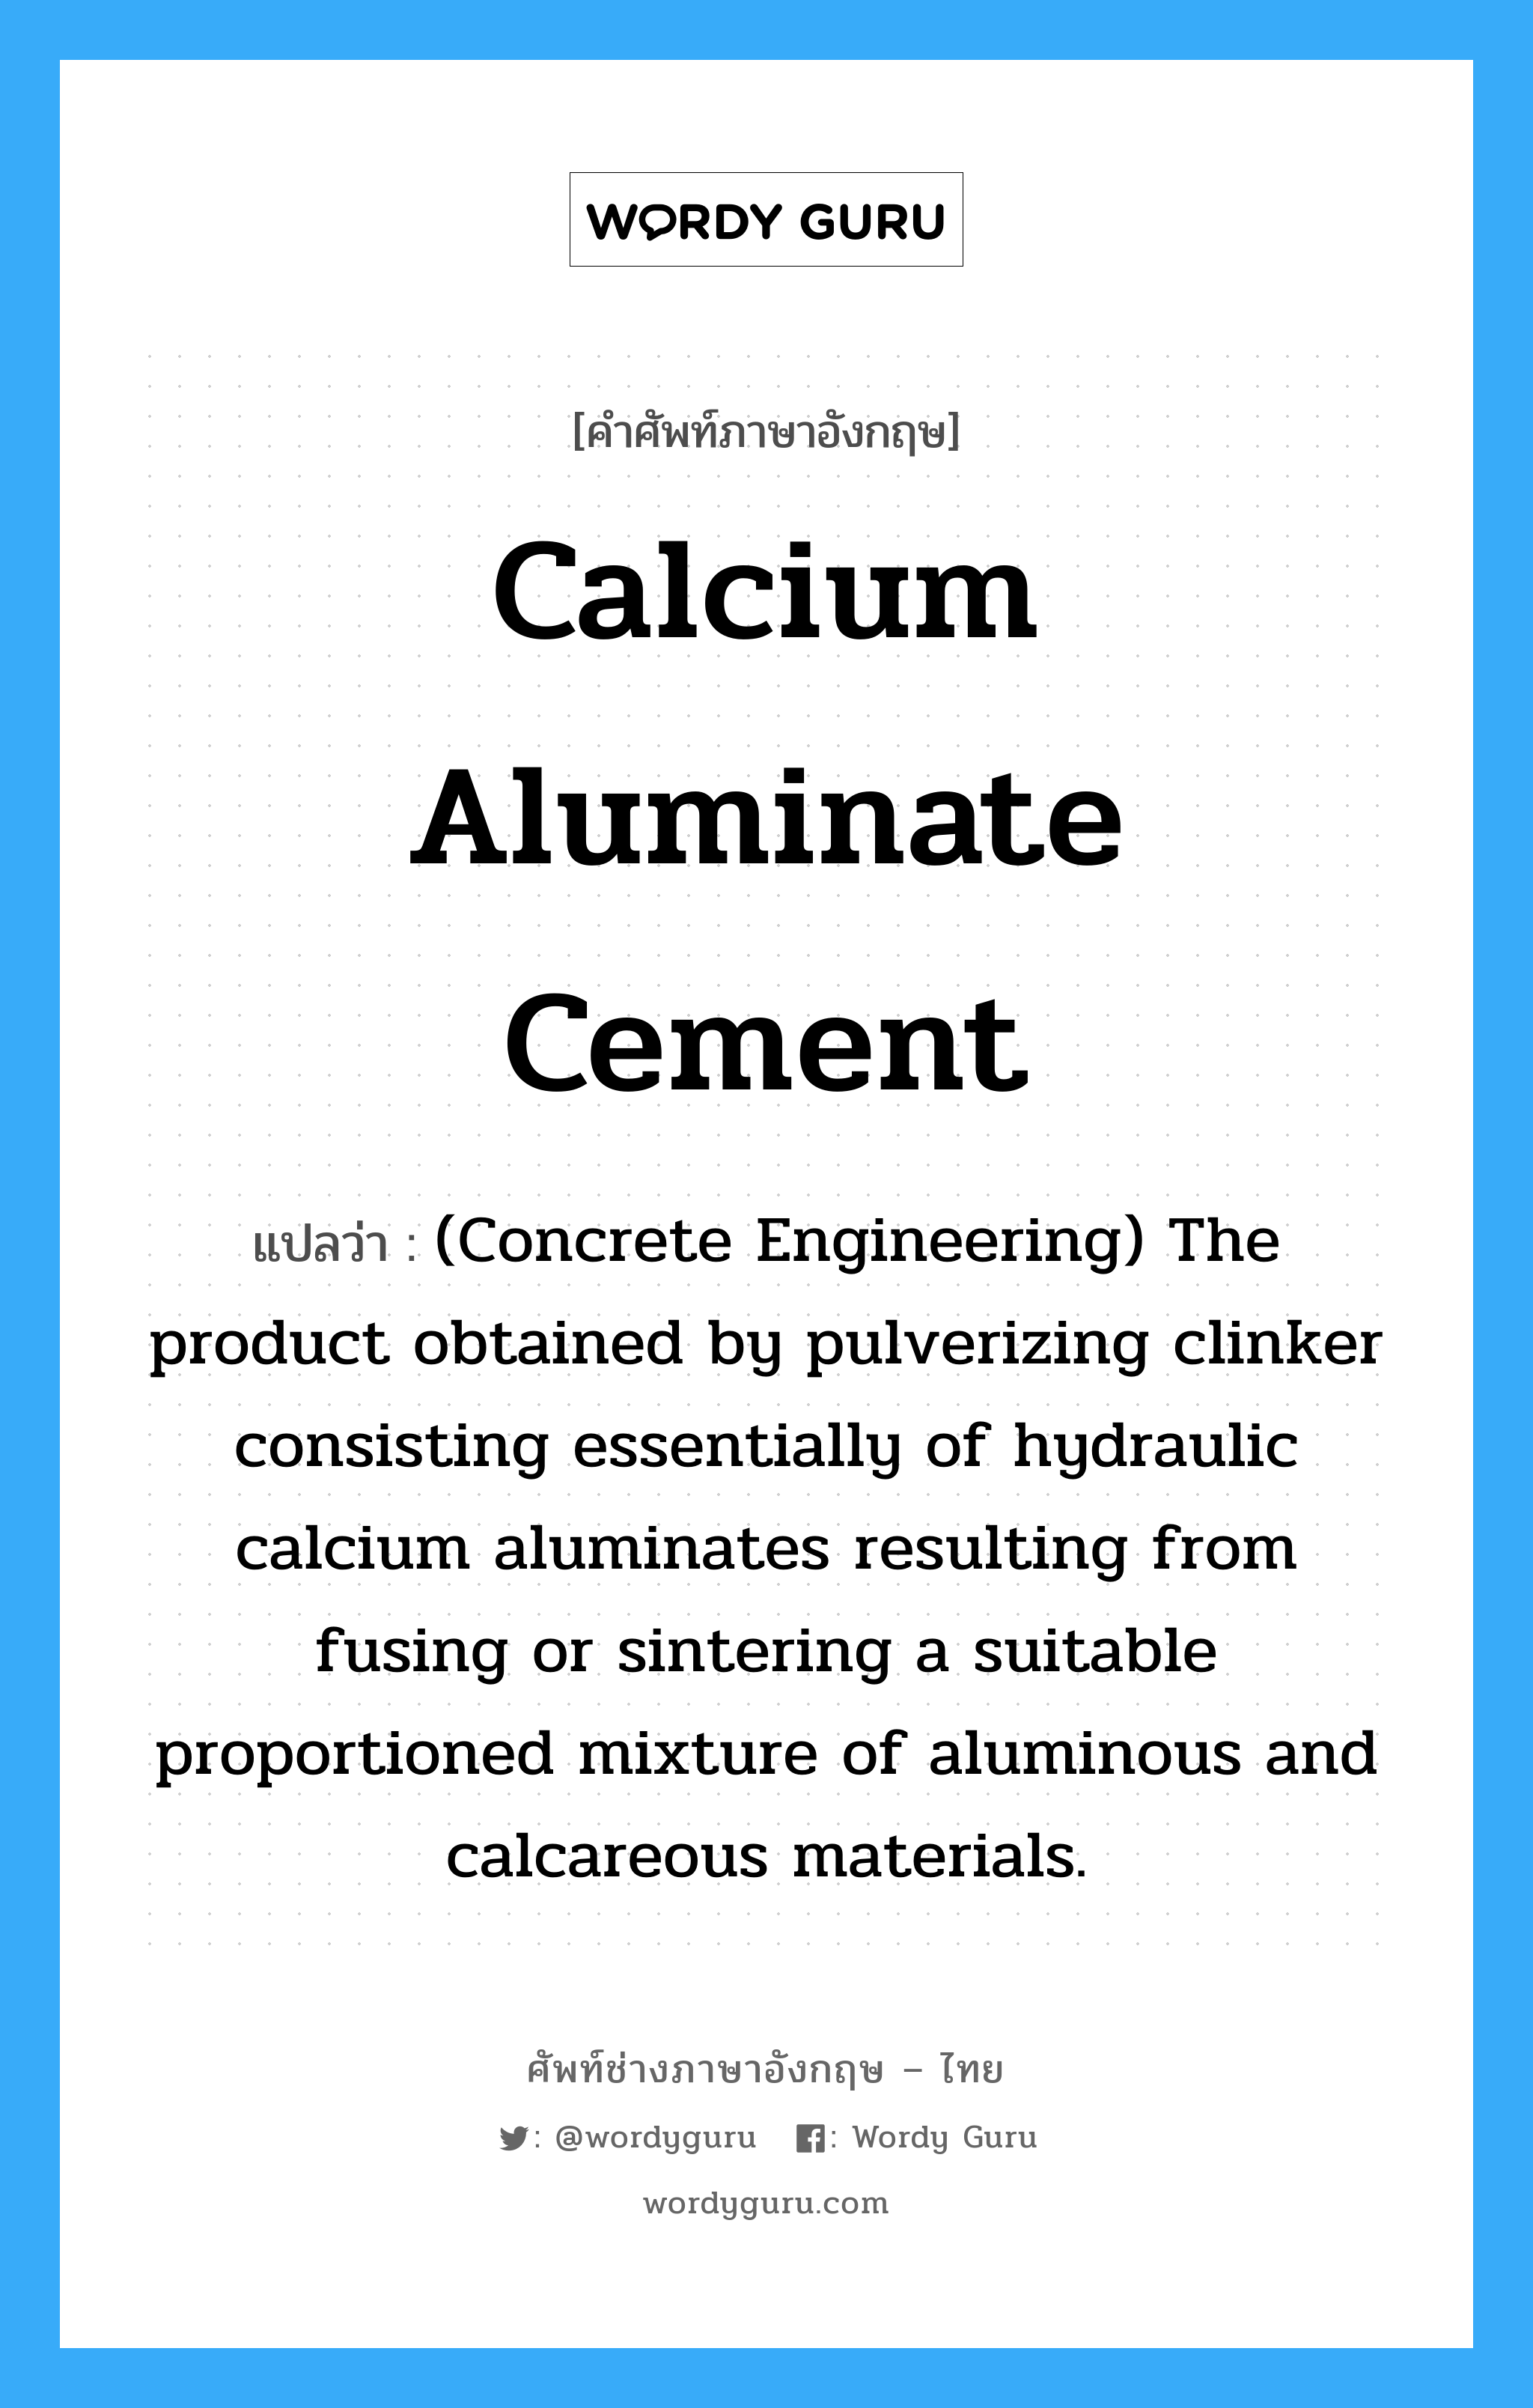 Calcium Aluminate Cement แปลว่า?, คำศัพท์ช่างภาษาอังกฤษ - ไทย Calcium Aluminate Cement คำศัพท์ภาษาอังกฤษ Calcium Aluminate Cement แปลว่า (Concrete Engineering) The product obtained by pulverizing clinker consisting essentially of hydraulic calcium aluminates resulting from fusing or sintering a suitable proportioned mixture of aluminous and calcareous materials.